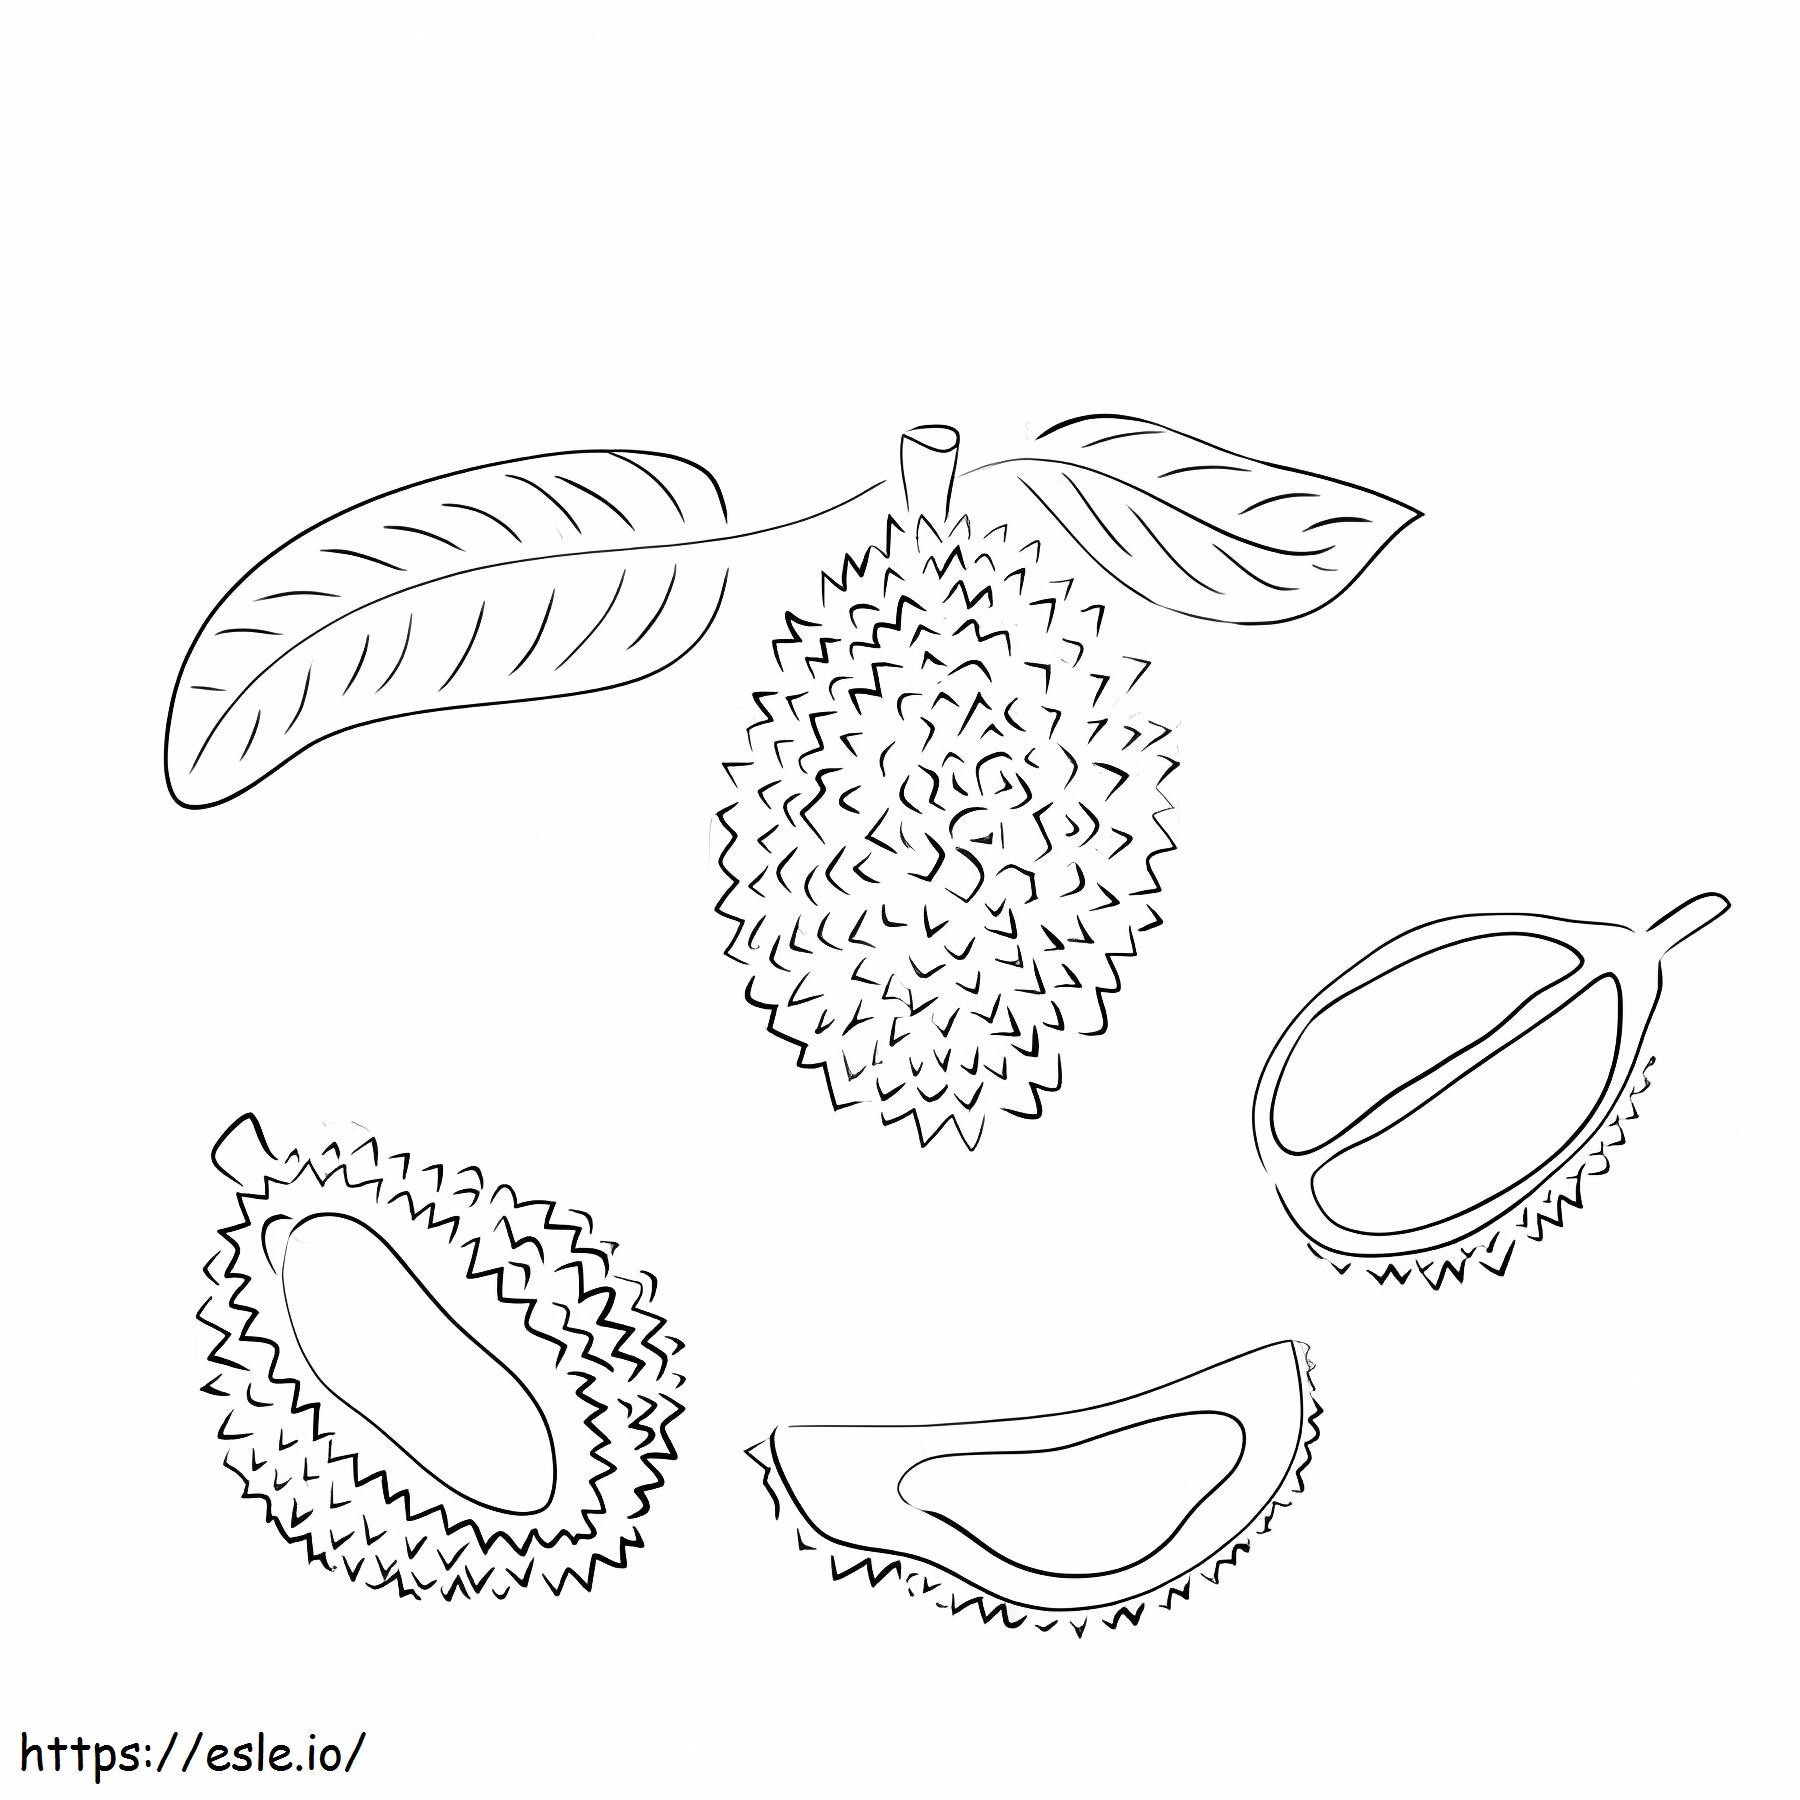 Perfect Durian coloring page